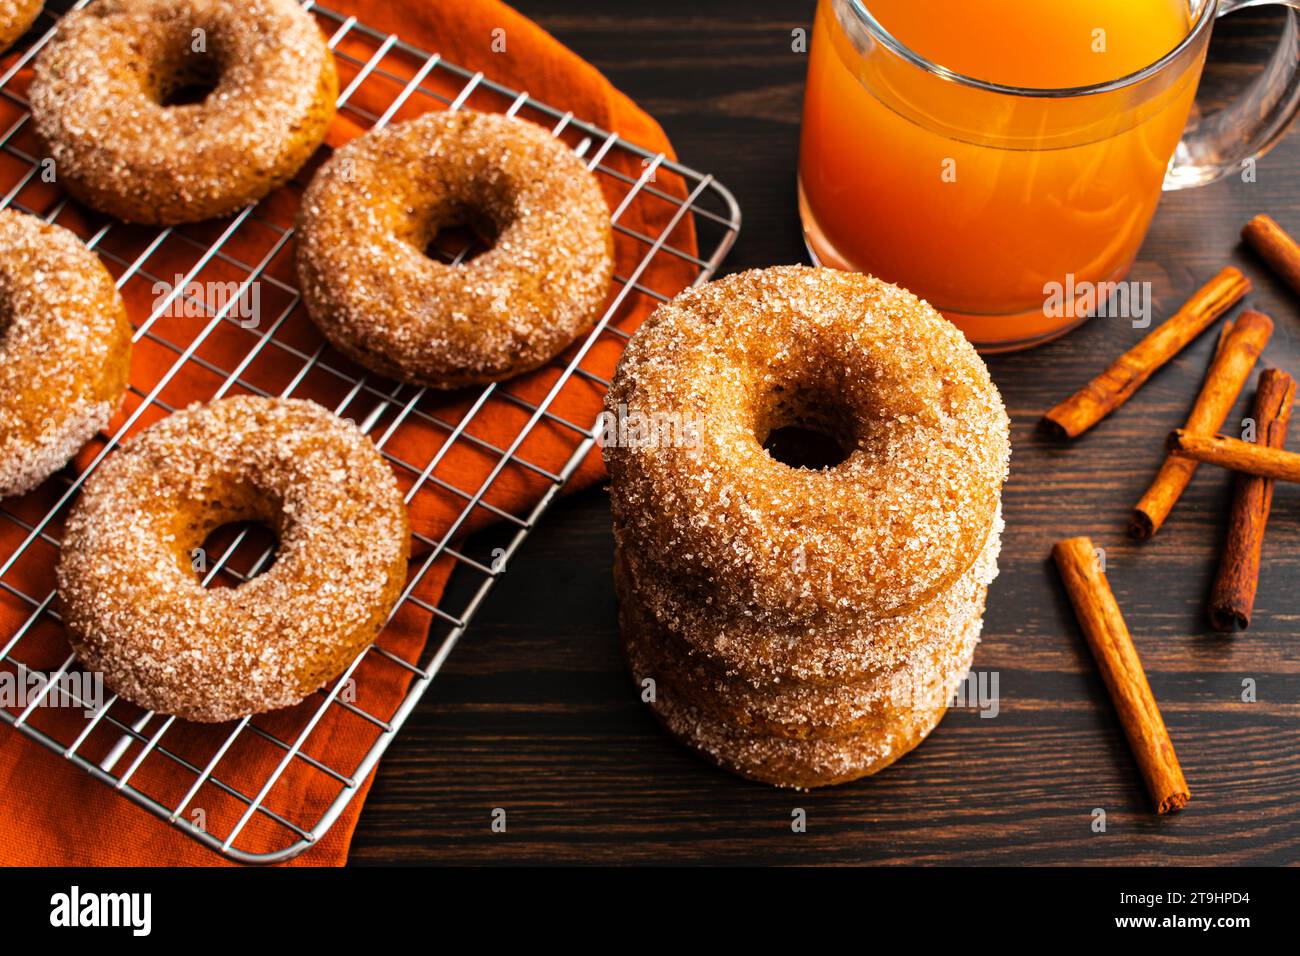 Baked Apple Cider Donuts with Cinnamon Sugar Coating: Baked doughnuts cooling on a wire rack viewed from directly above Stock Photo